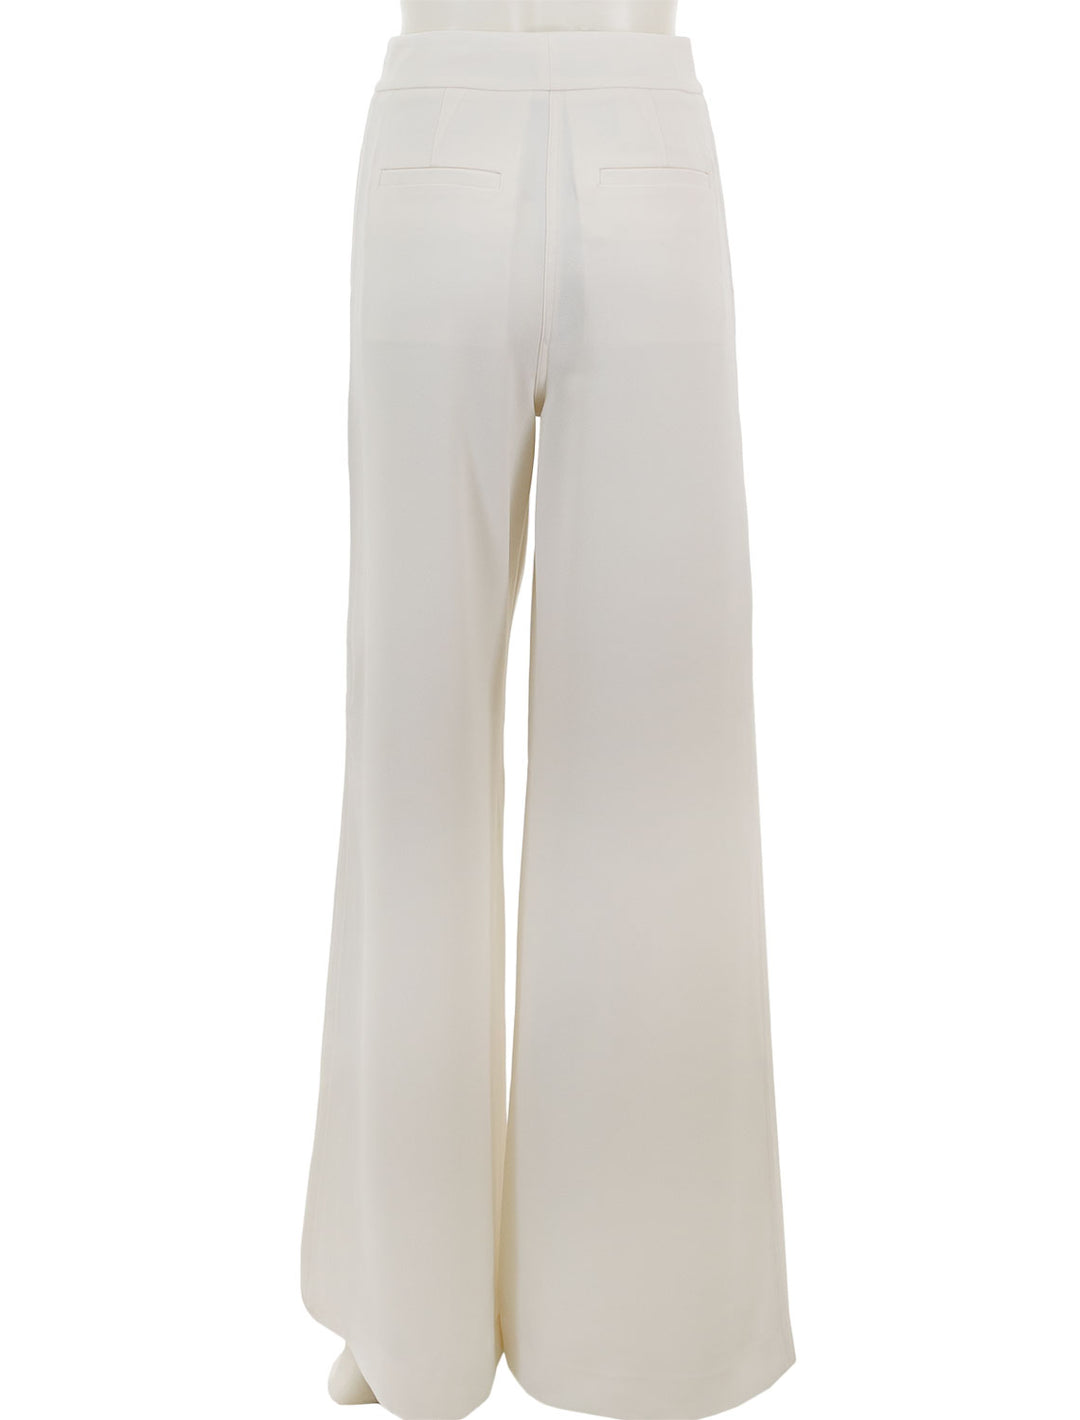 Back view of Saint Art's neve mid waisted wideleg trouser in ivory crepe.